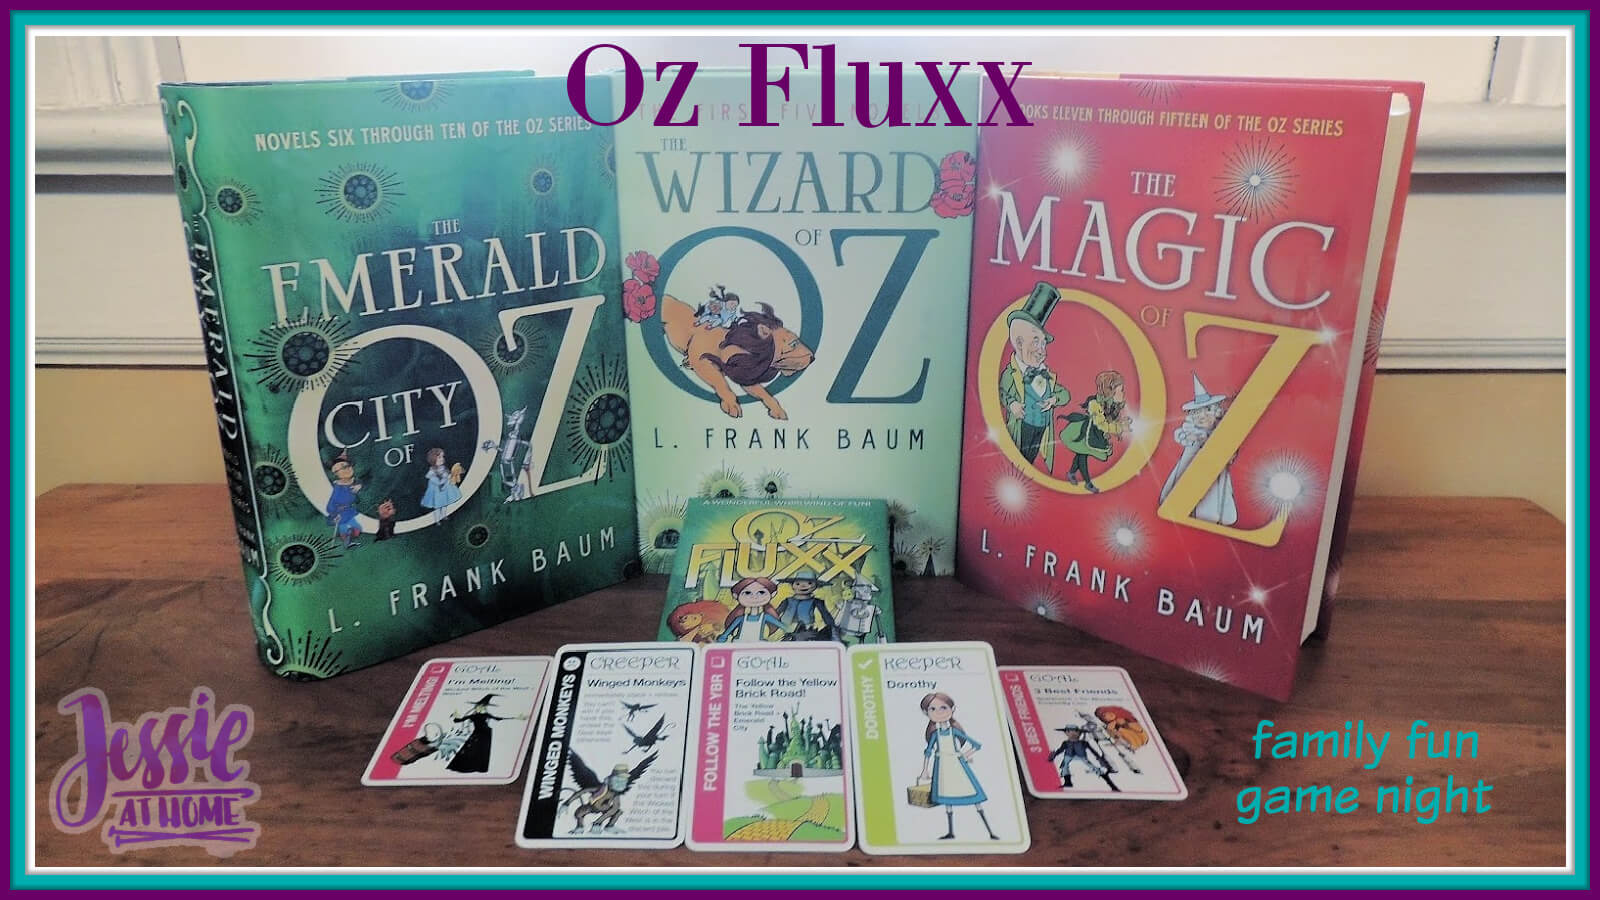 Oz Fluxx Family Game- It’s back and we love it!